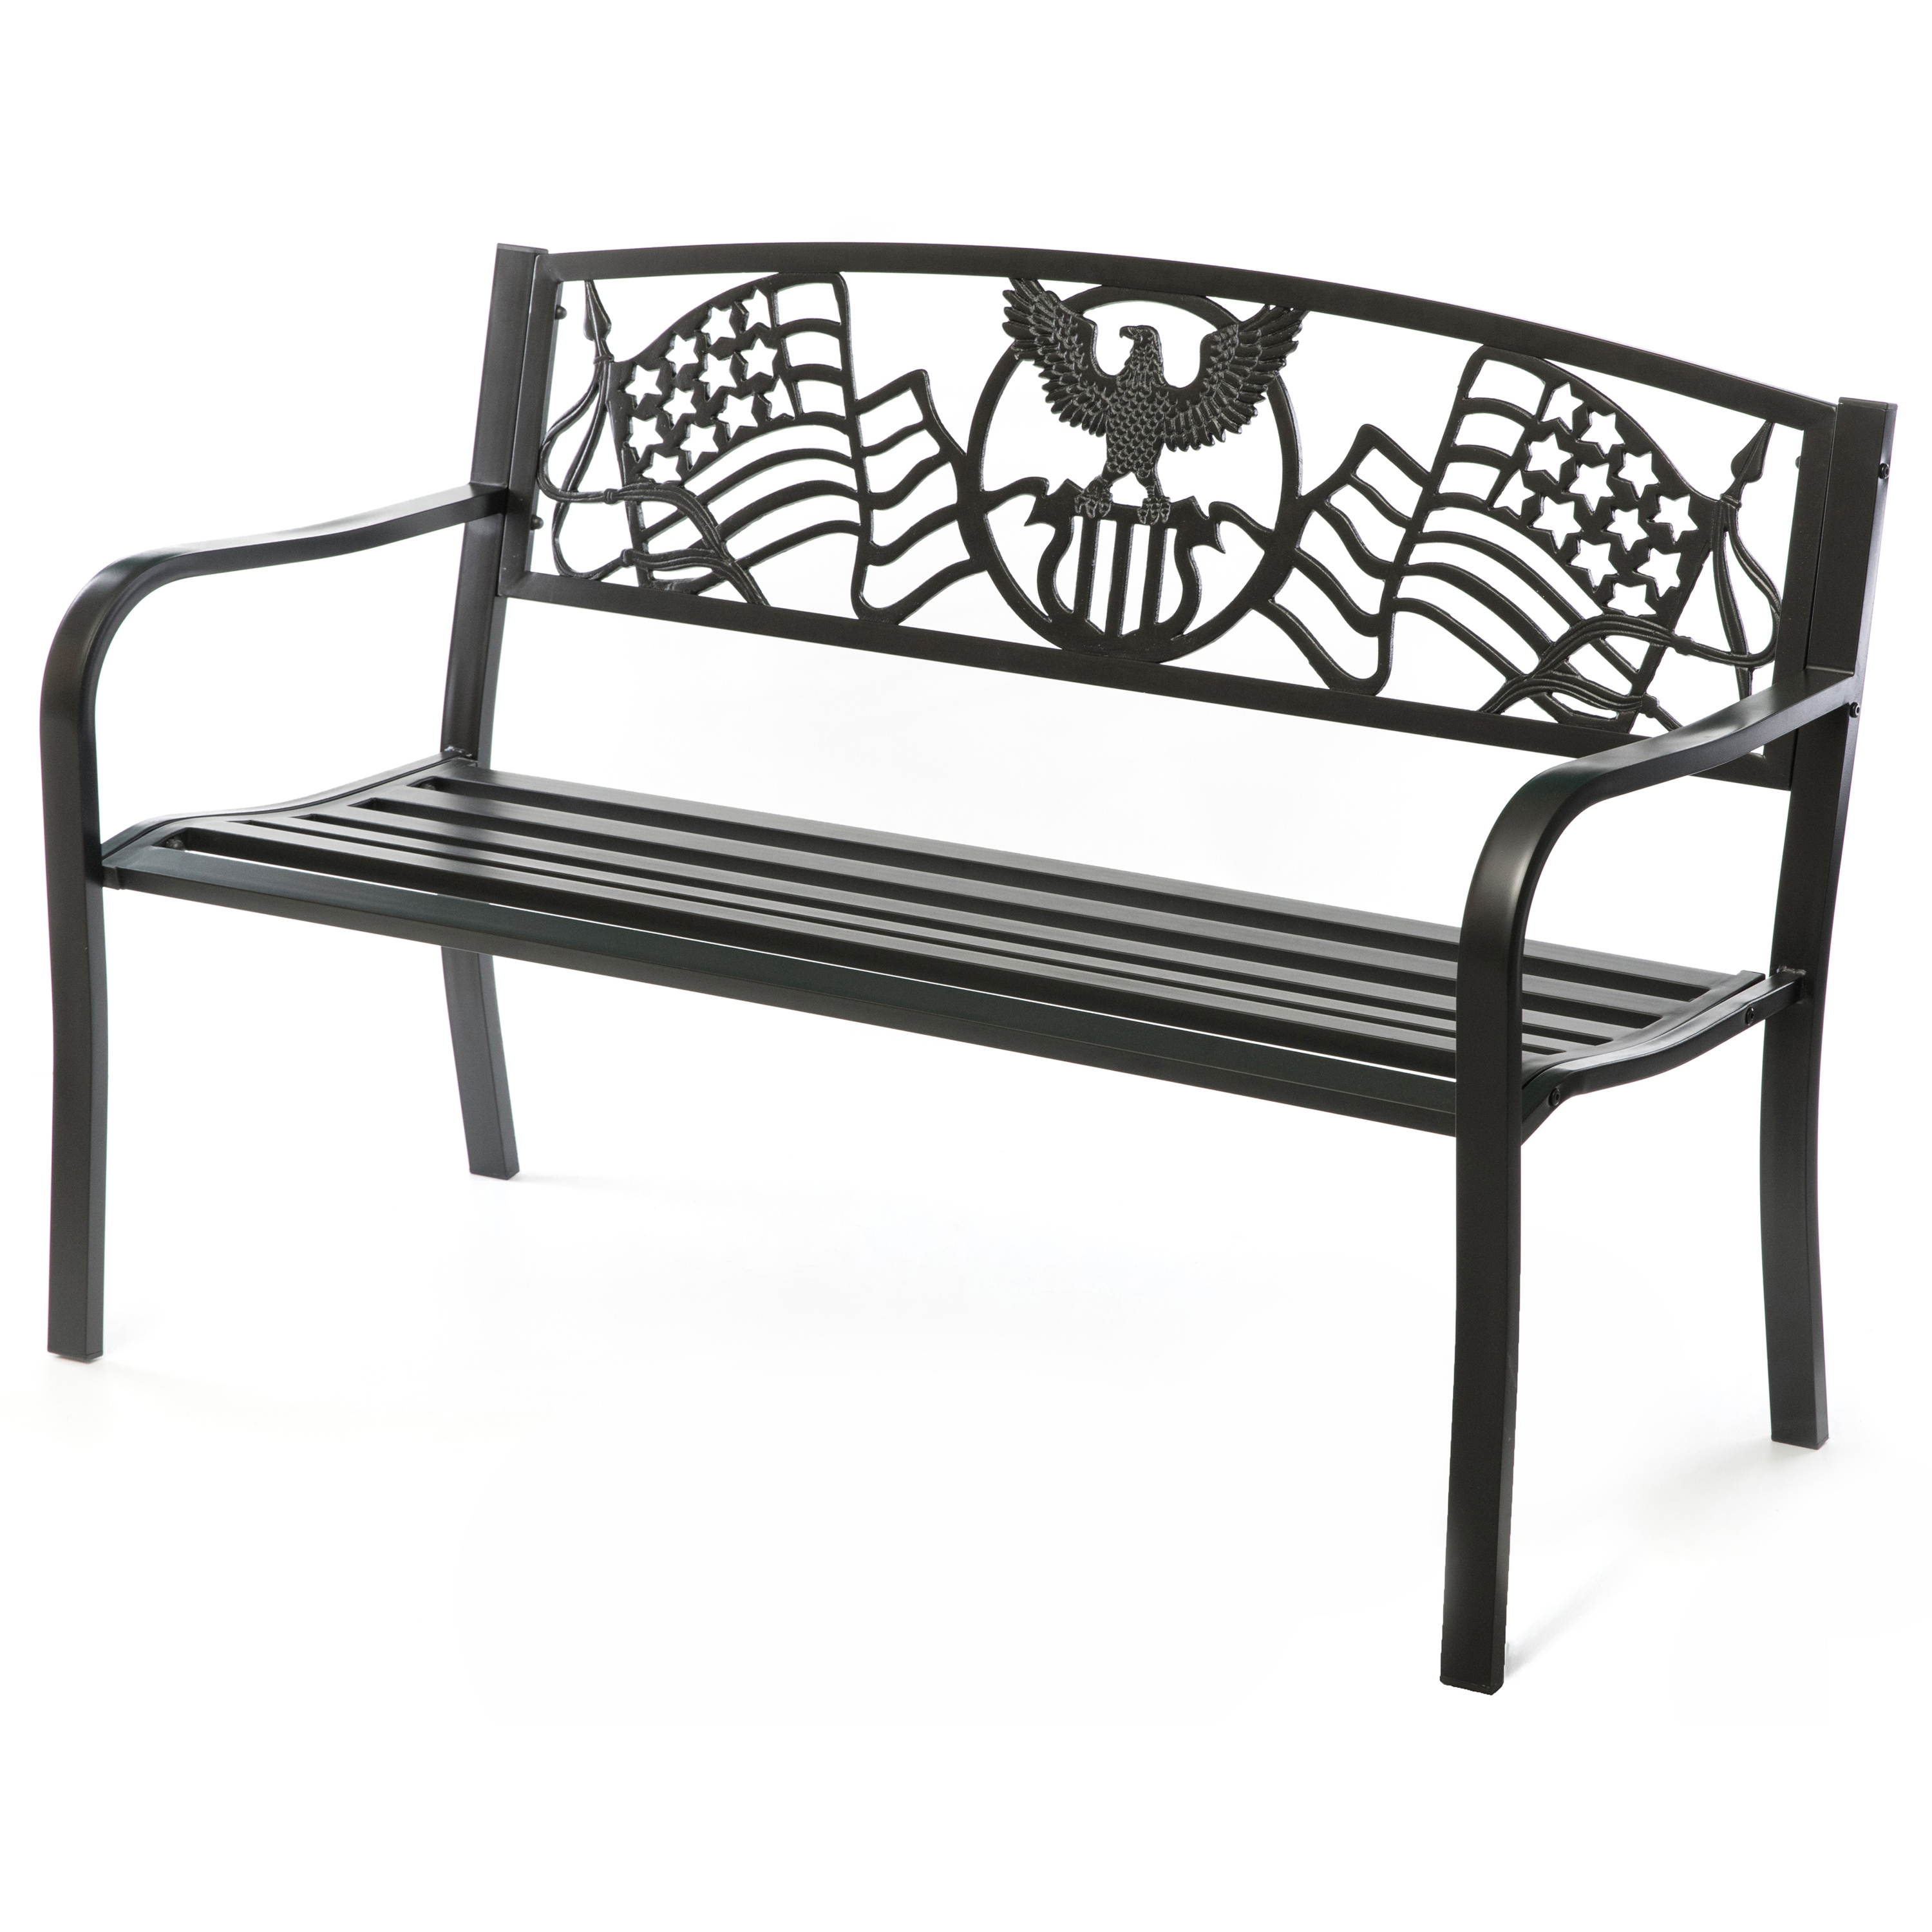 Steel Outdoor Patio Garden Park Seating Bench With Cast Iron Patriotic American Flag And Eagle Backrest, Front Porch Yard Bench Lawn Decor